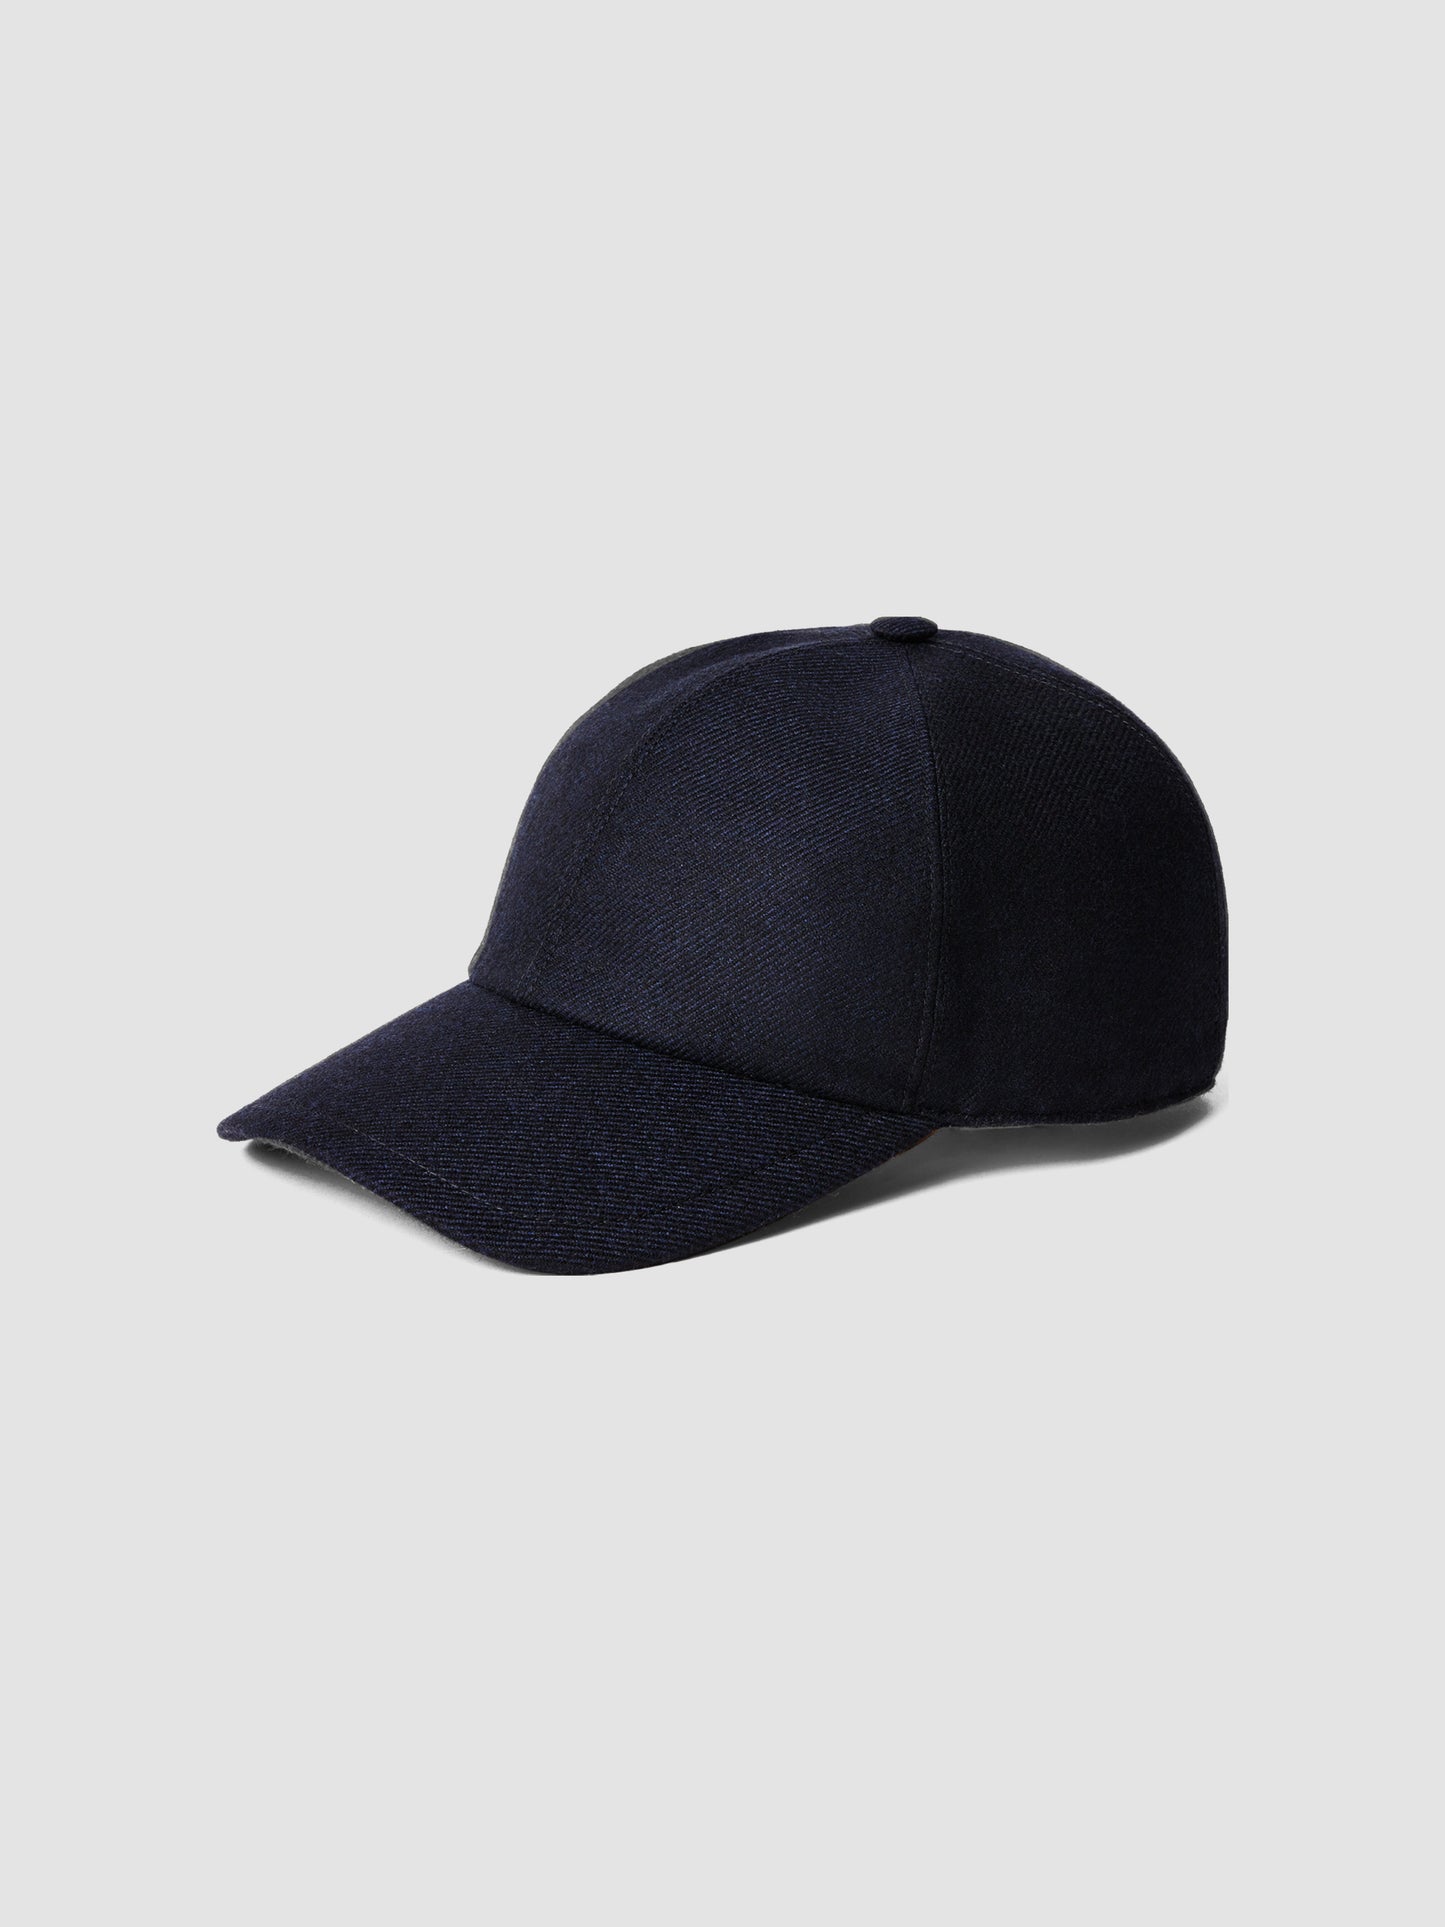 Wool Cashmere Blend Cap Navy Product Image